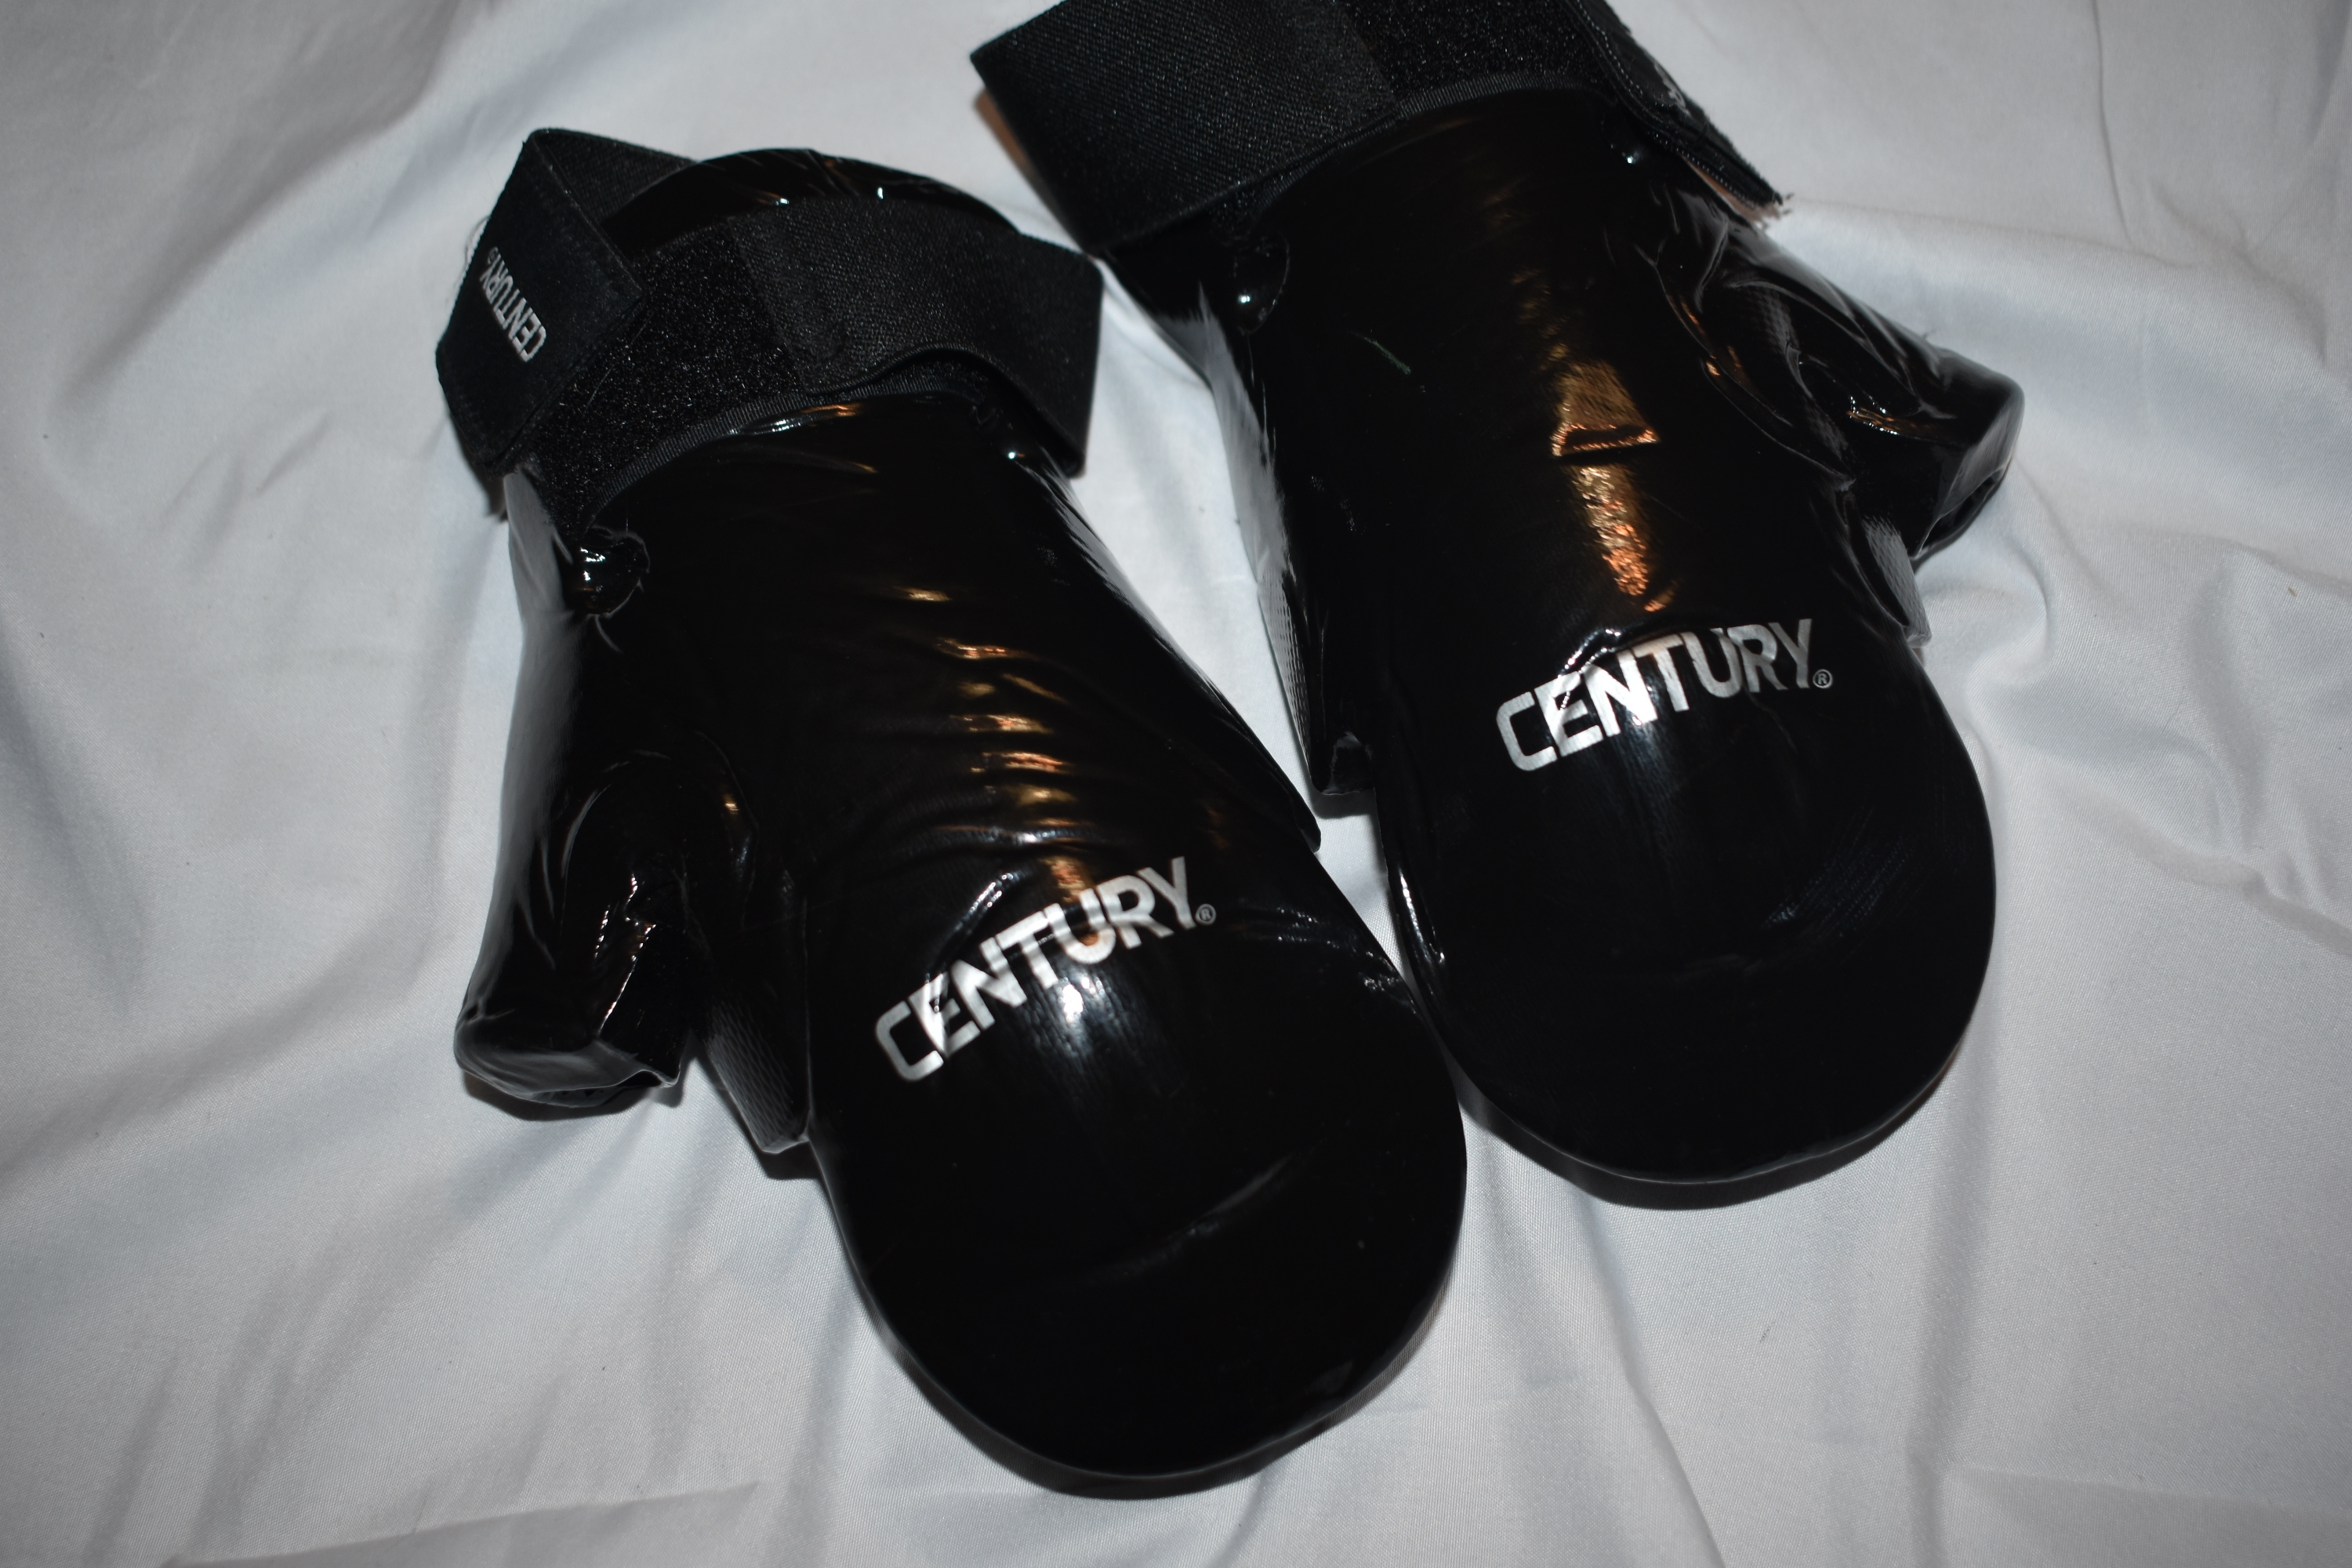 Century Martial Arts Sparring Hand Pads, Black, Youth - New Condition!